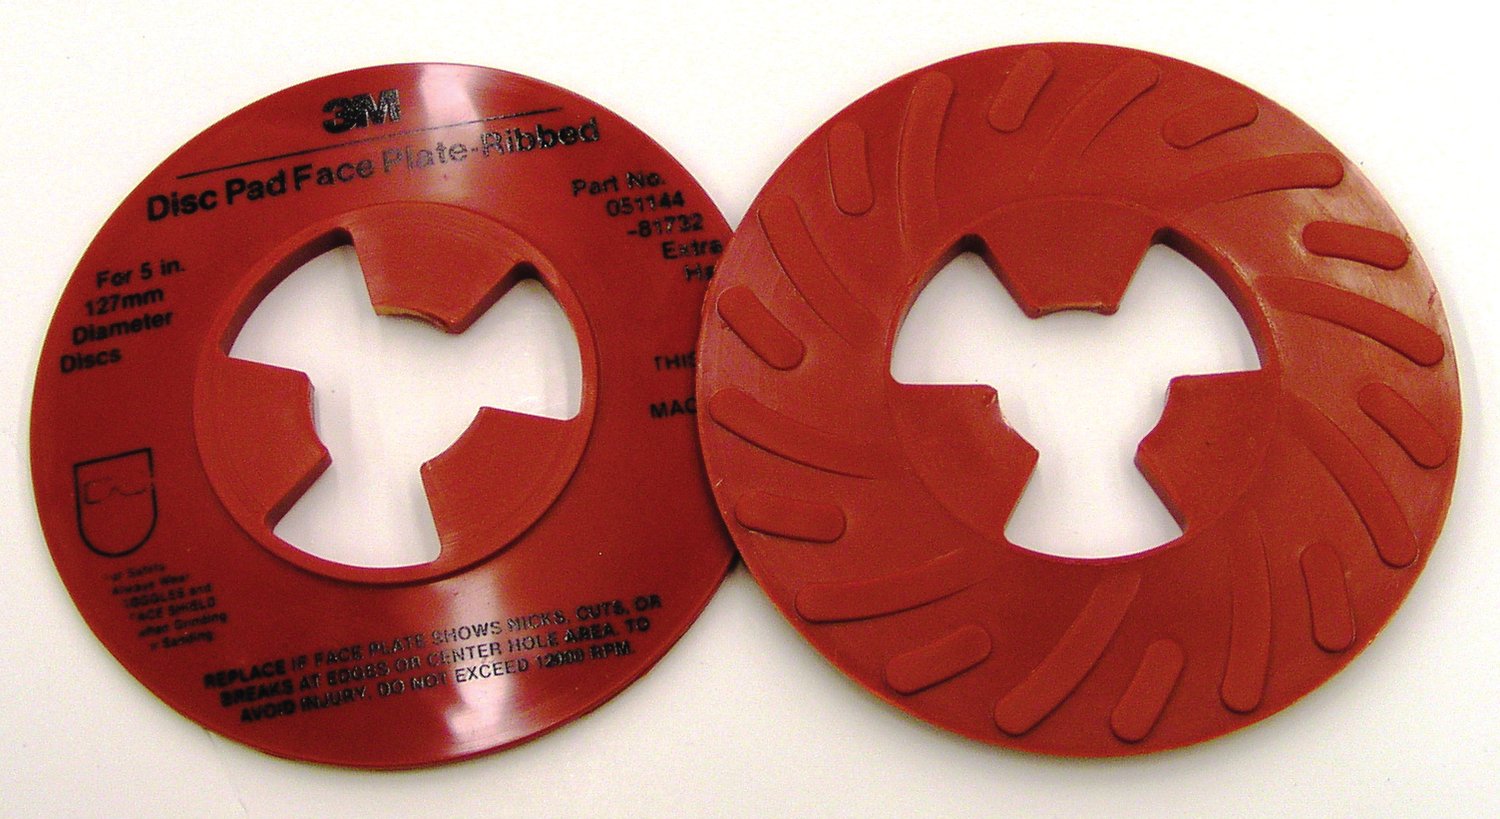 7010362529 - 3M Disc Pad Face Plate Ribbed 81732L, Extra Hard, 5 in, Red, 10 ea/Case